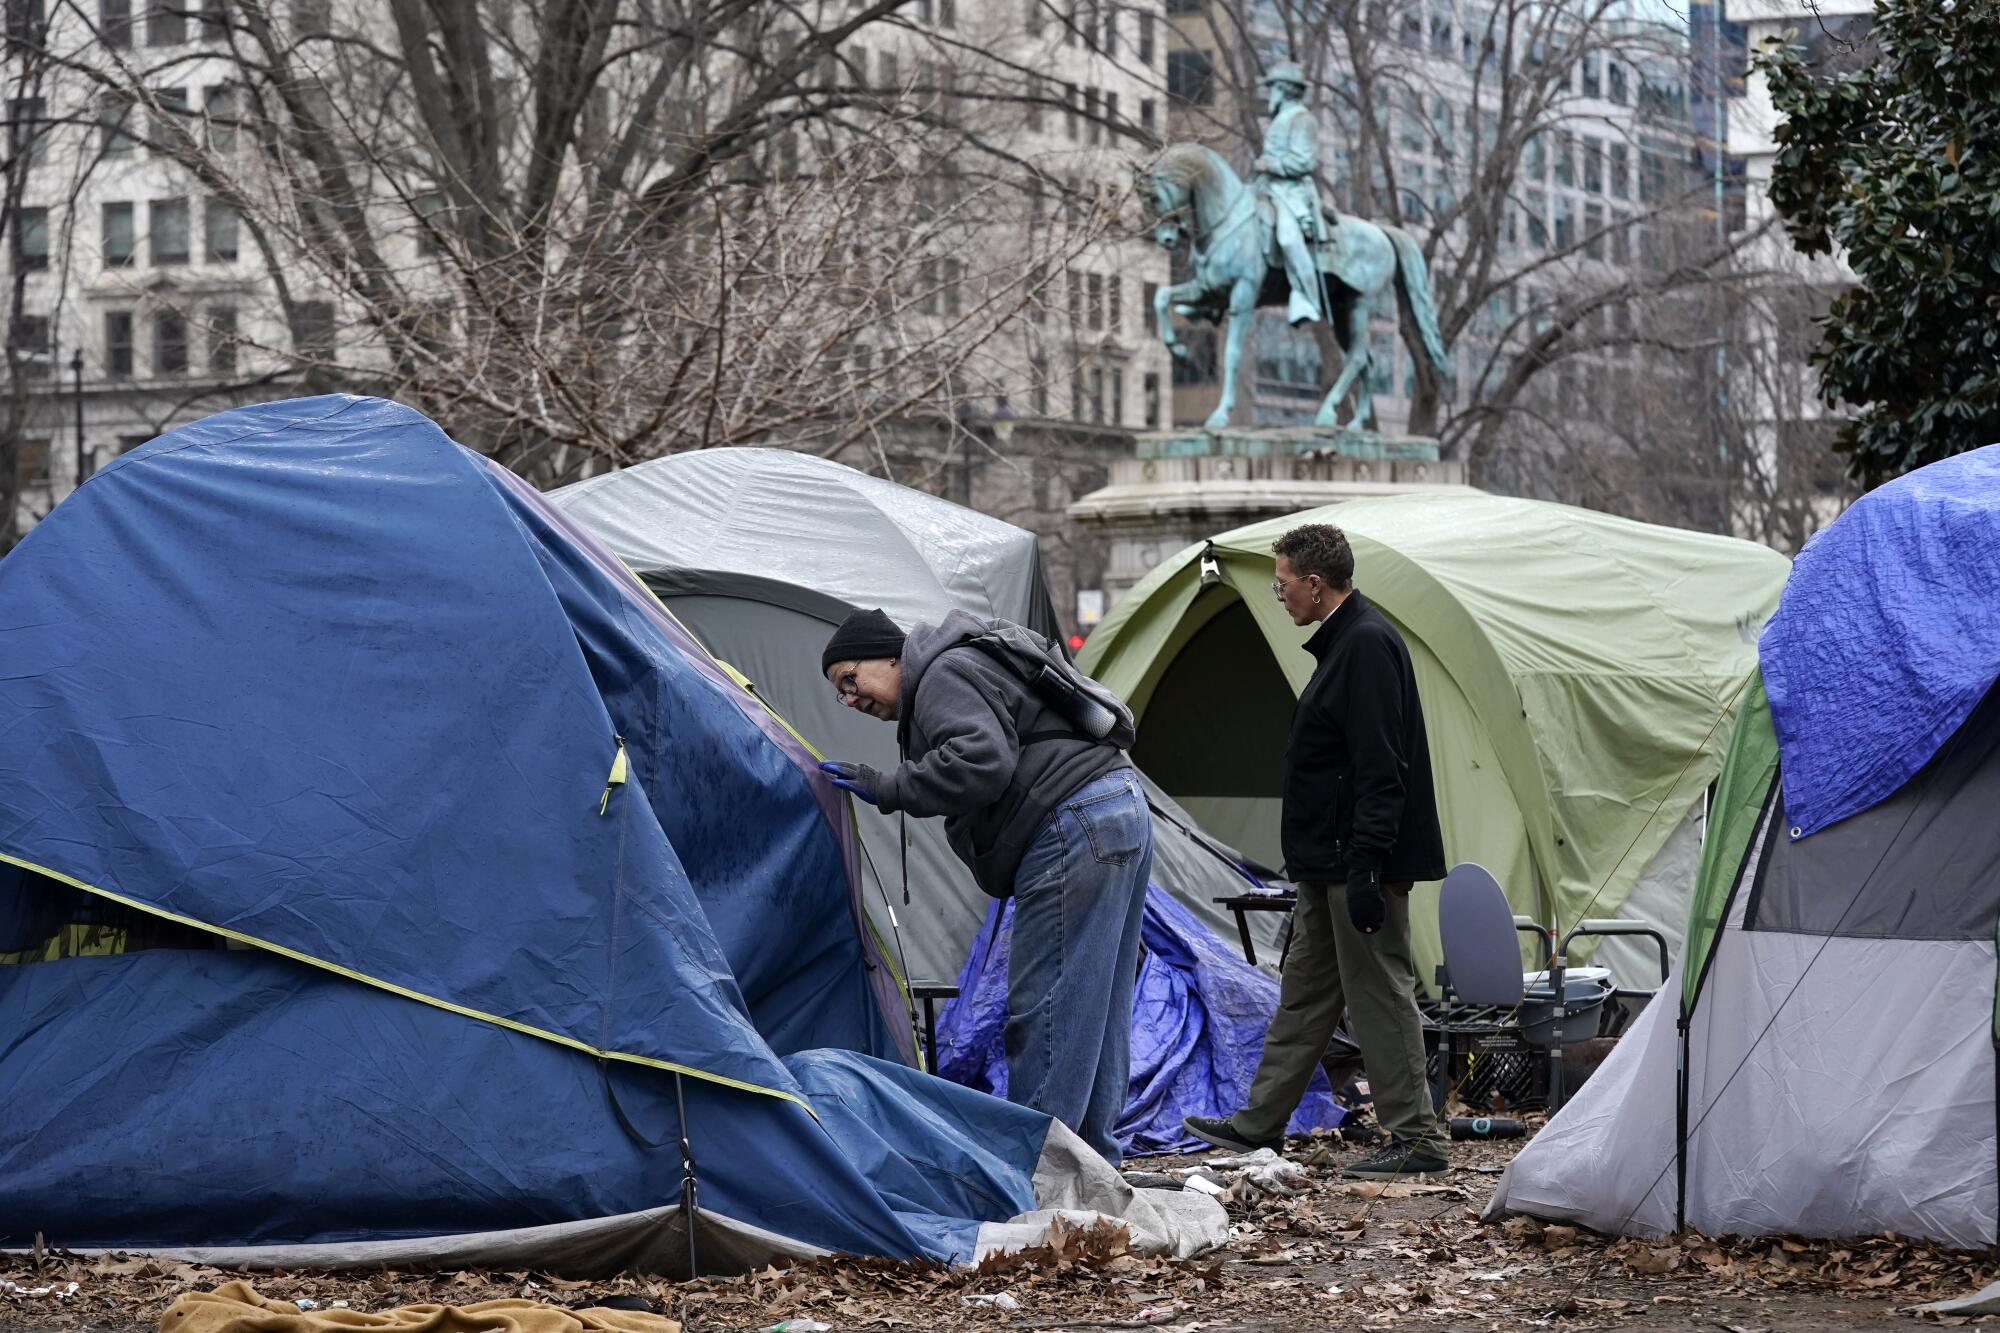 Homeless advocates check inside tents near a statue and buildings.